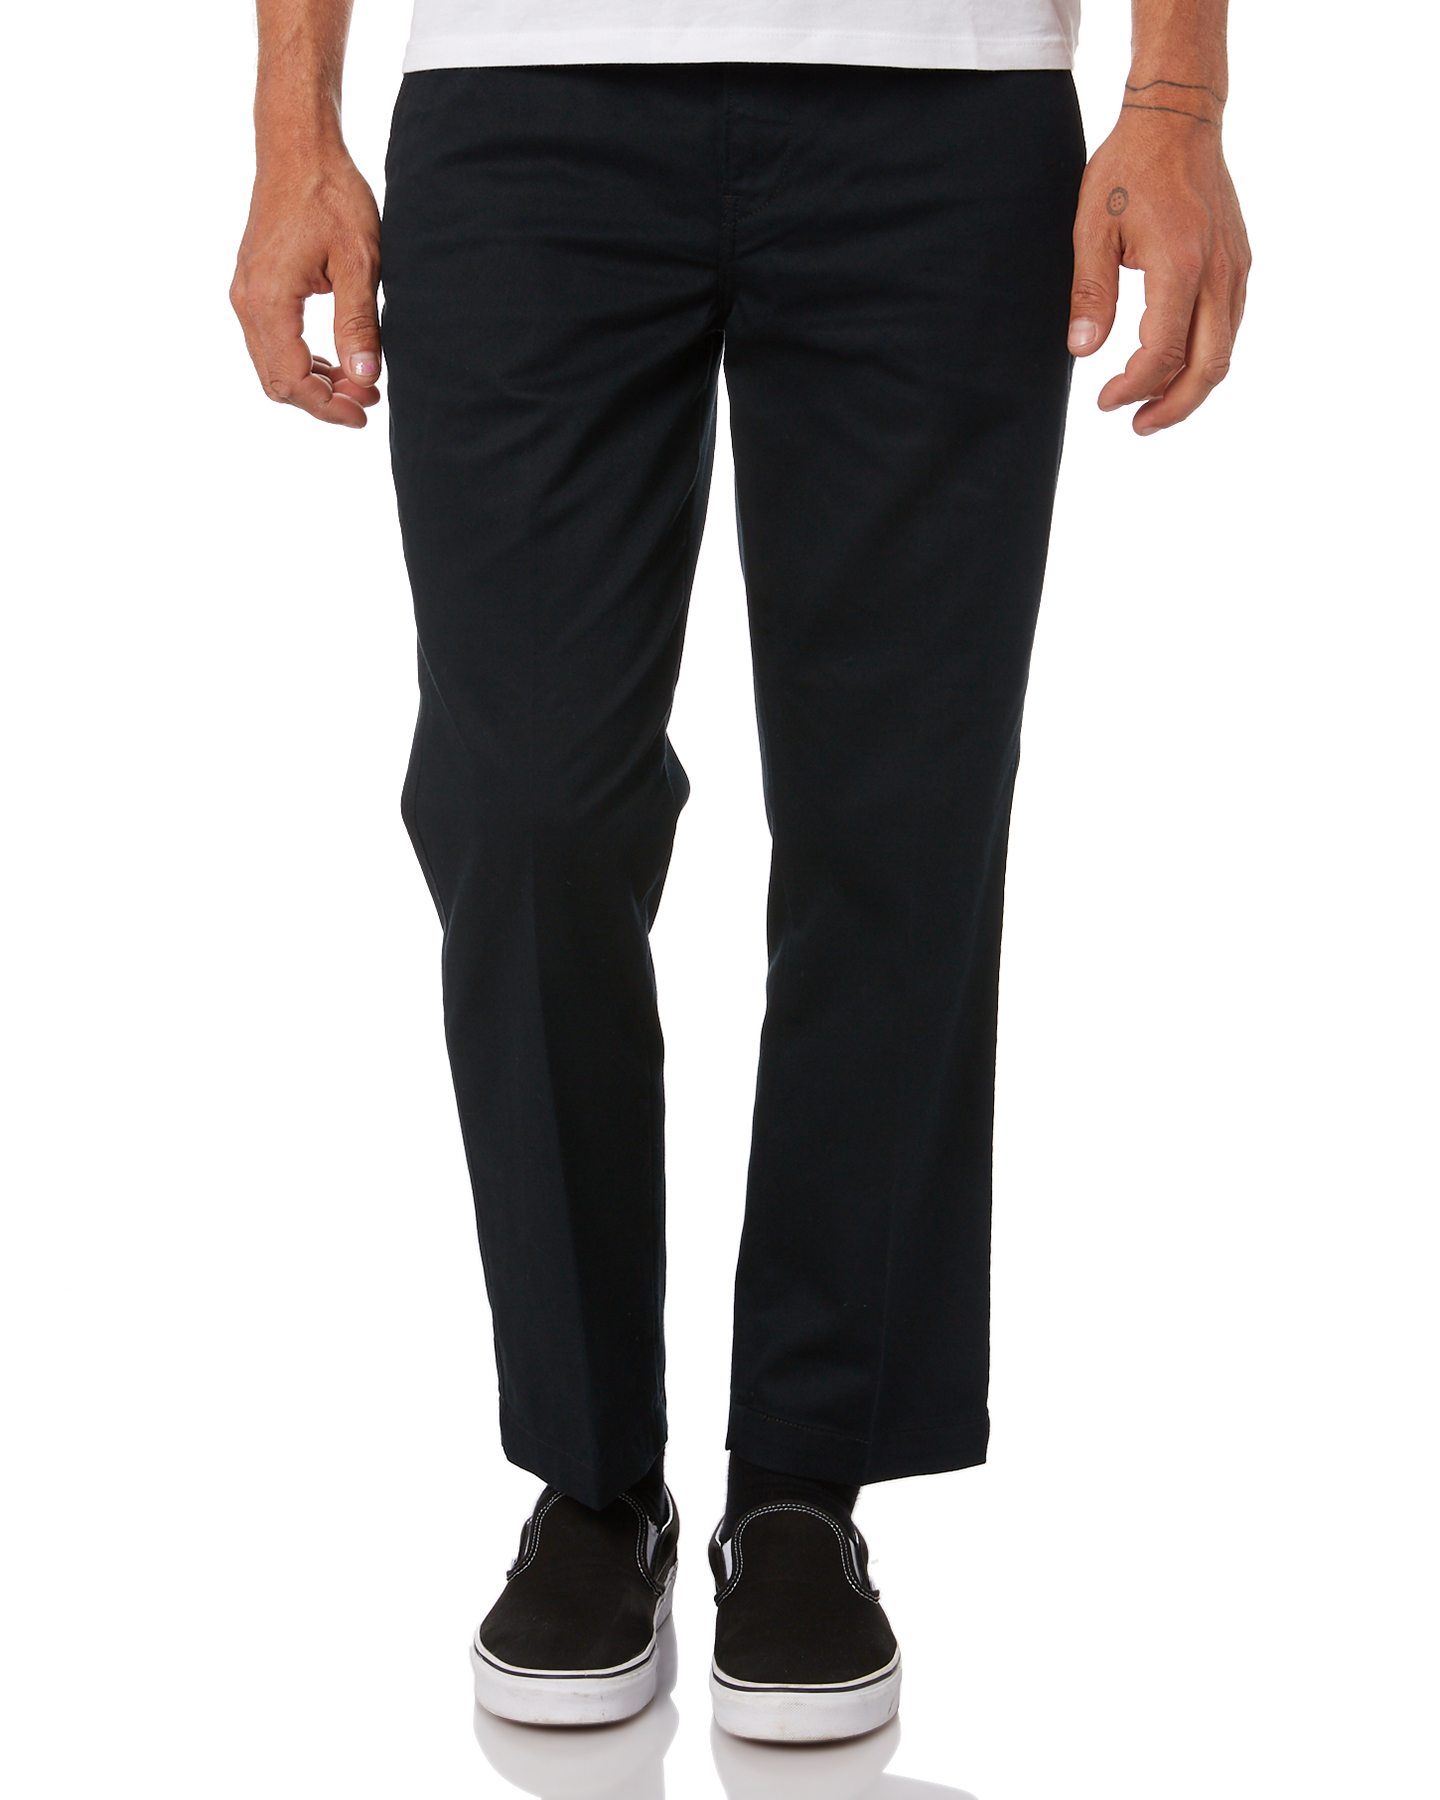 Levi's Straight Crop Ii Mens Chino Pant - Mineral Black | SurfStitch